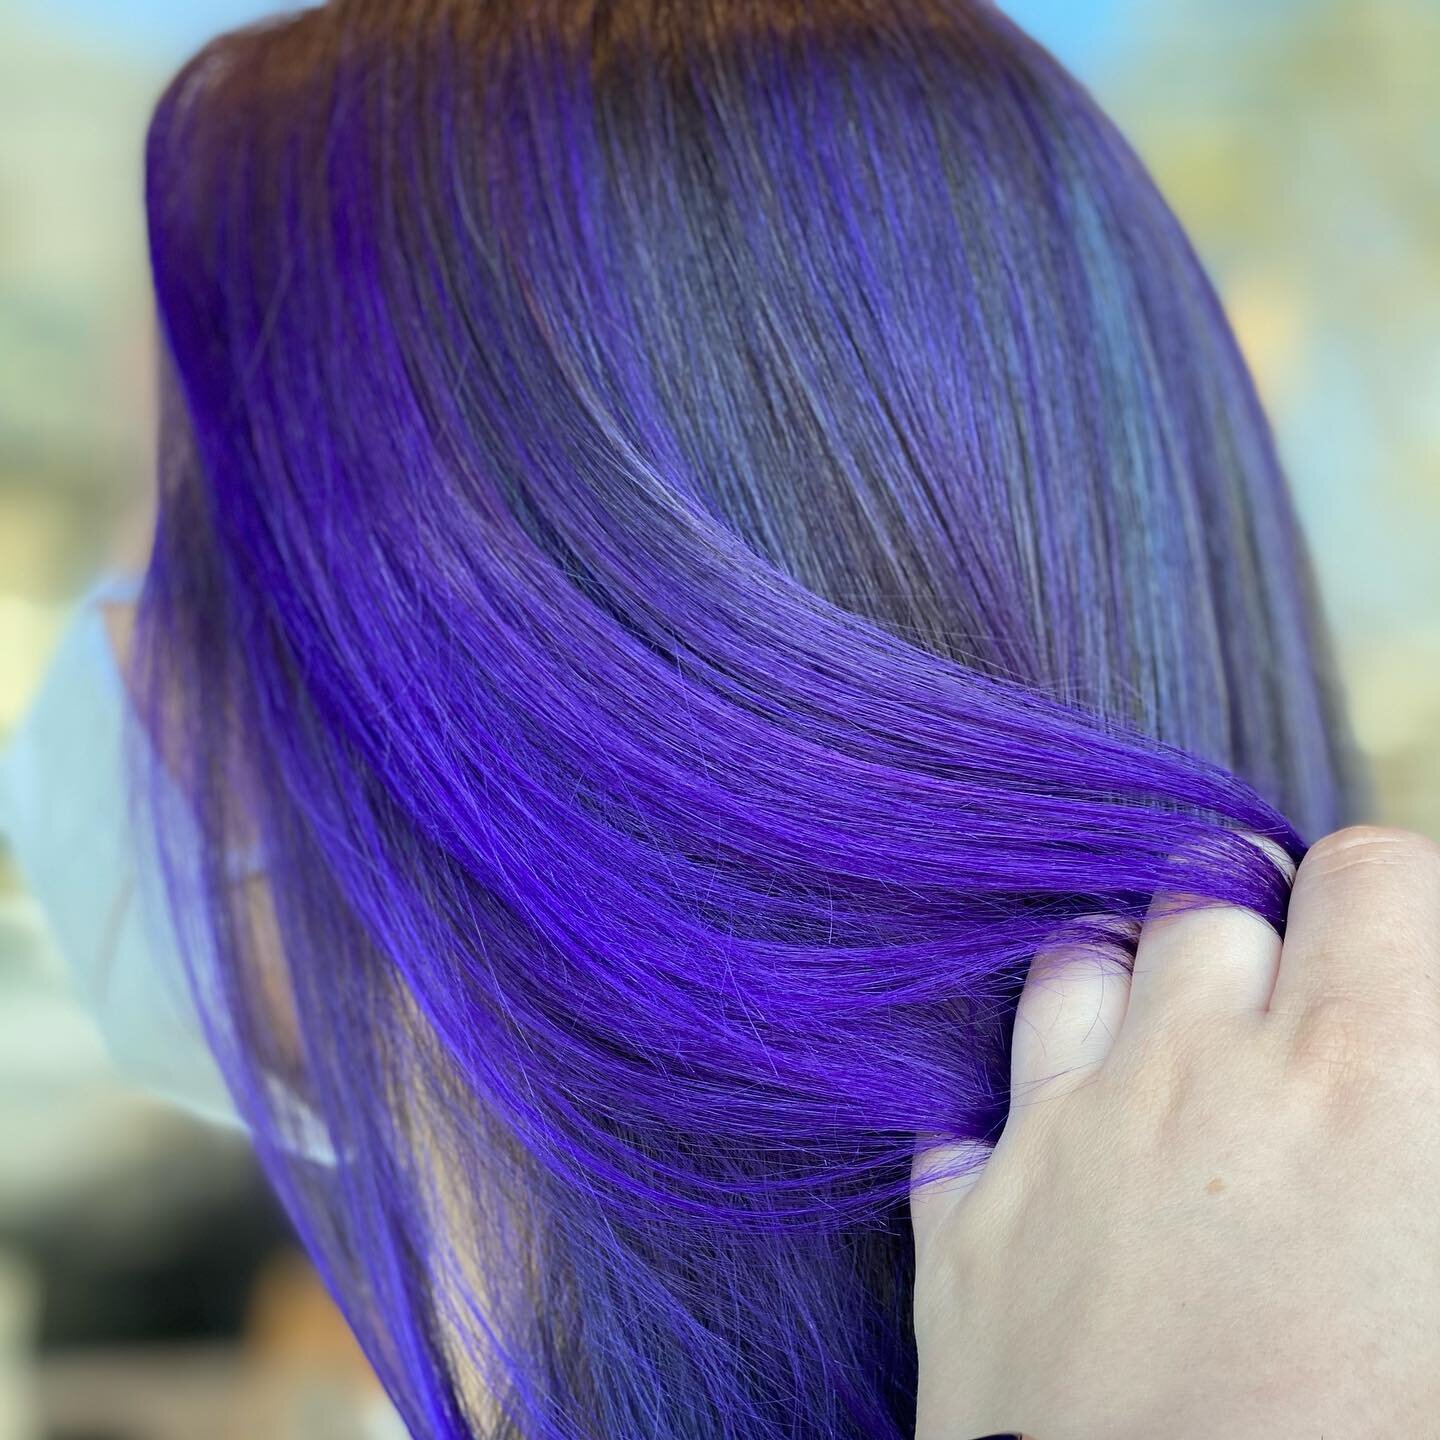 Sometimes you just need to do something fun! 💜💜💜💜💜💜💜💜💜💜💜💜💜💜💜💜💜💜💜💜💜💜
.
.
.
I got this color by using Colour.me by Kevin.Murphy 
FORMULA: 30g Pink/Violet Booster with 20g Blue Booster 3.5vol 15 mins (starting level 10)
.
.
.
@kevi